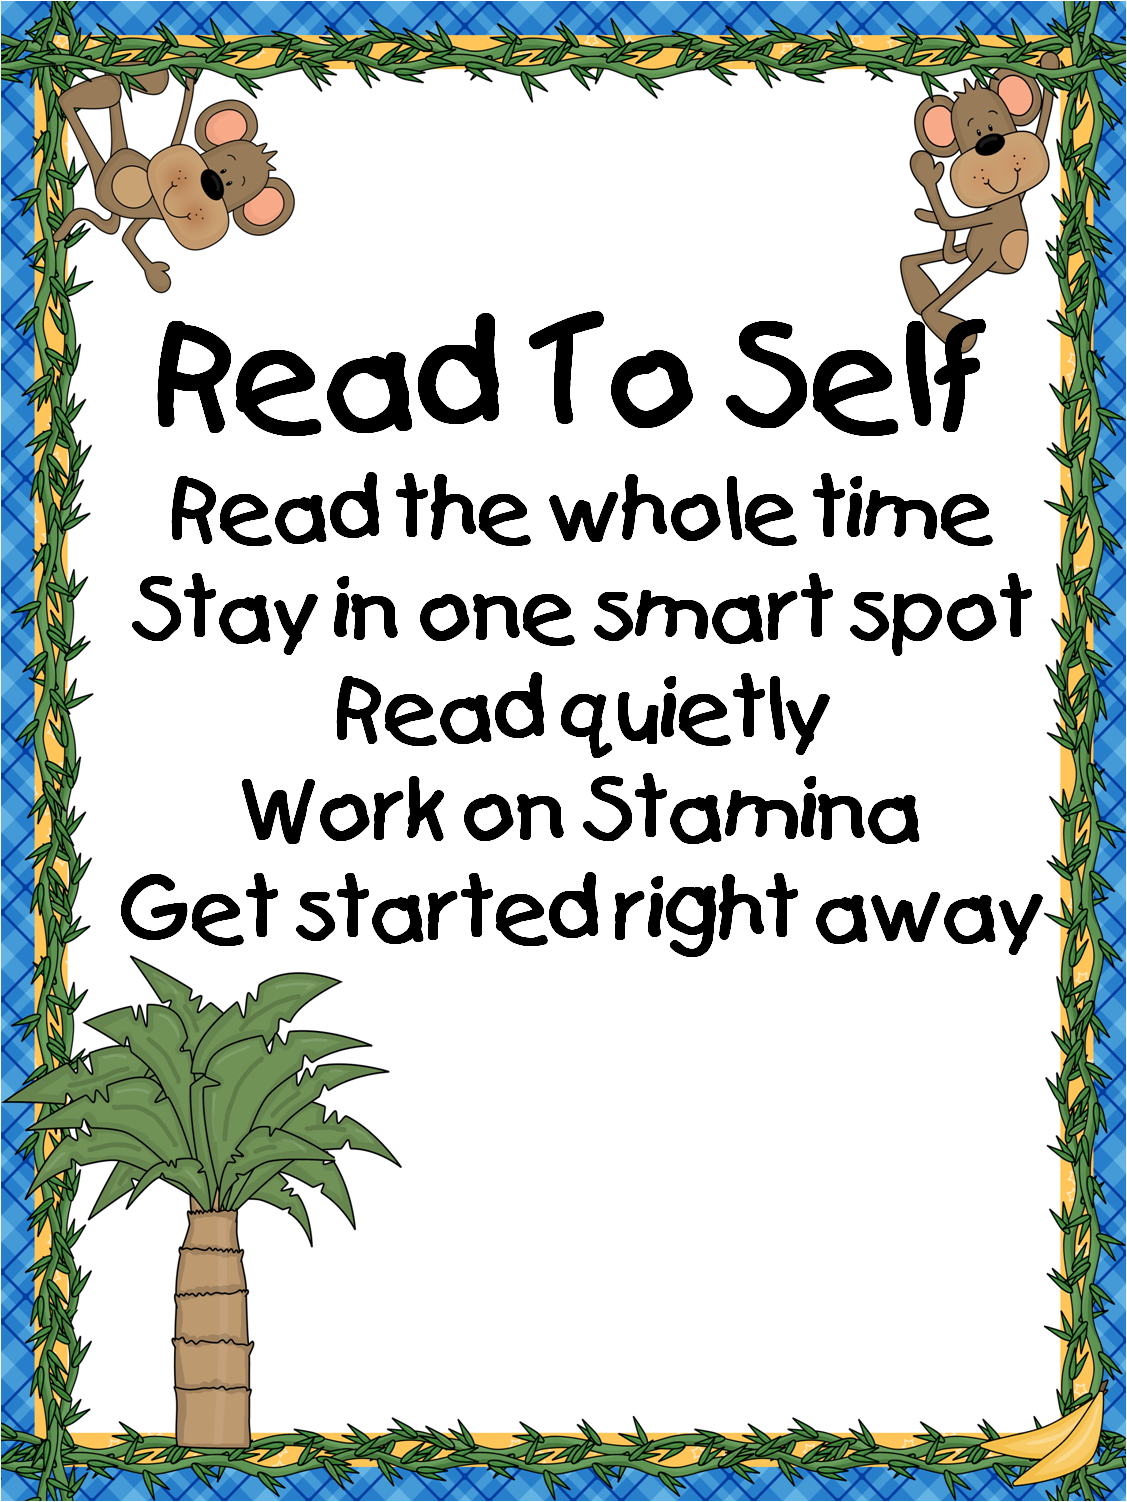 Daily 5 Read To Someone Clipart Images   Pictures   Becuo